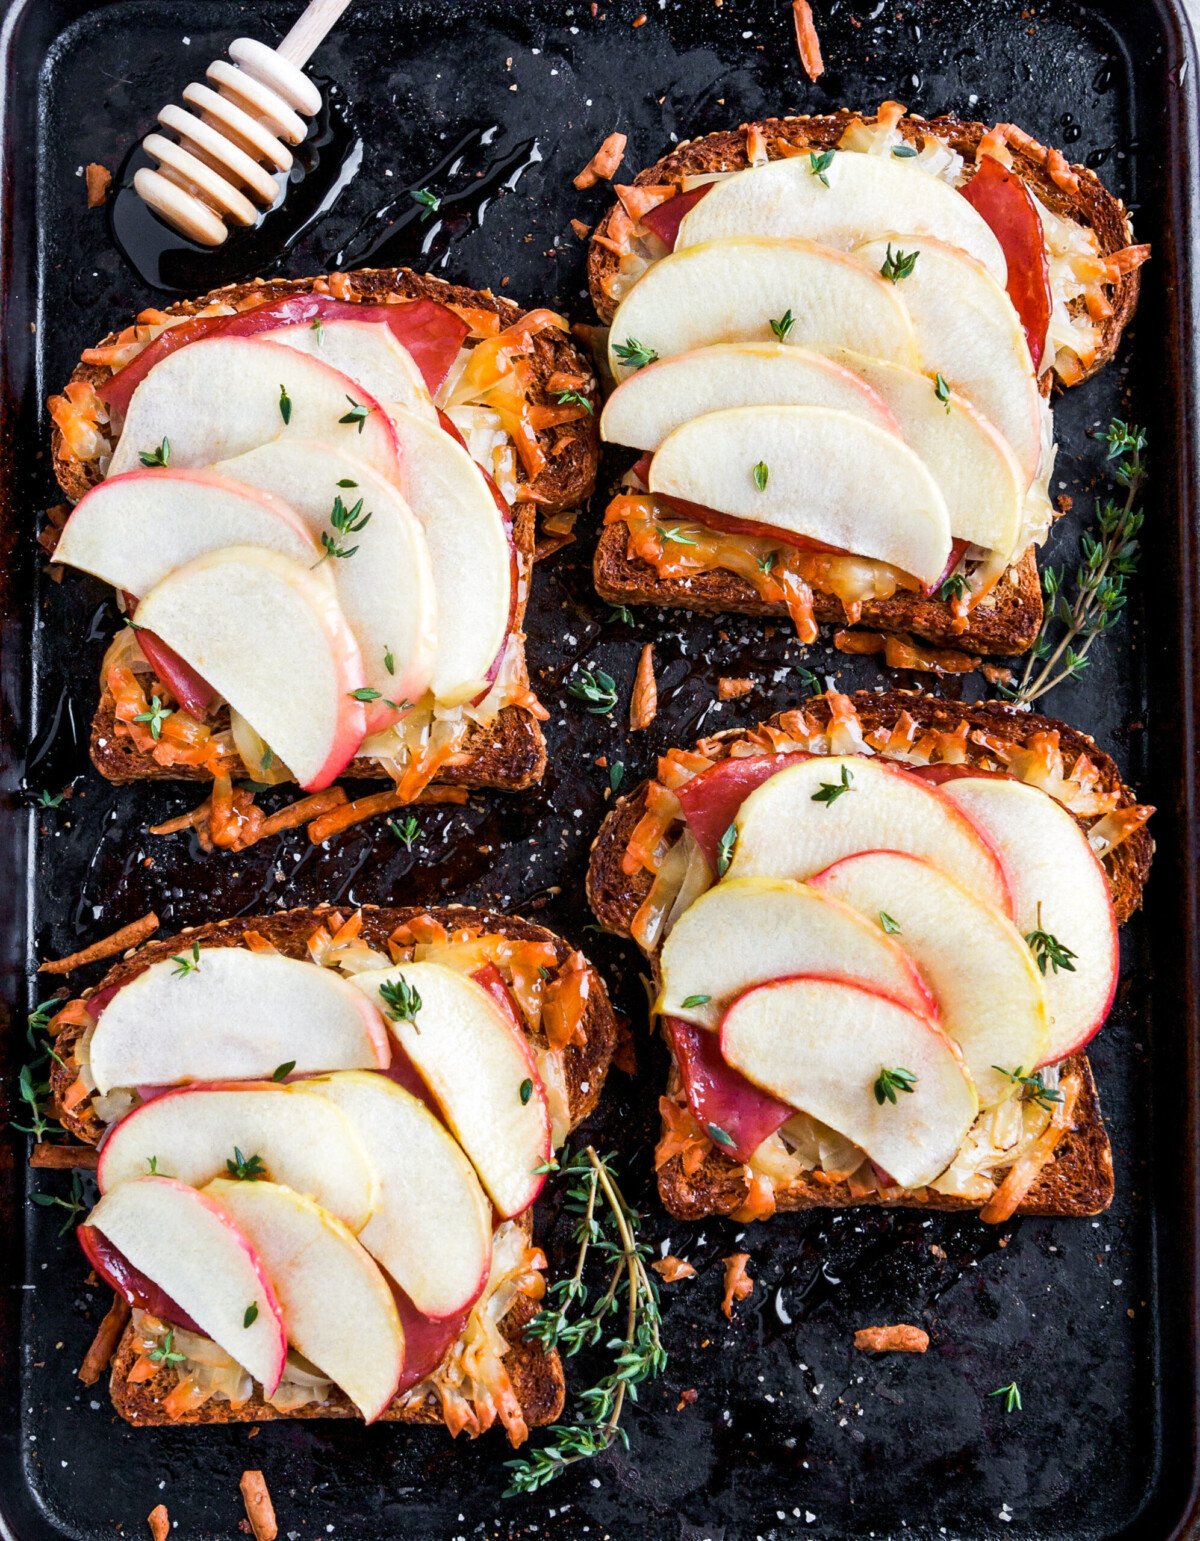 Open faced sandwiches with melted cheese and apple on baking sheet